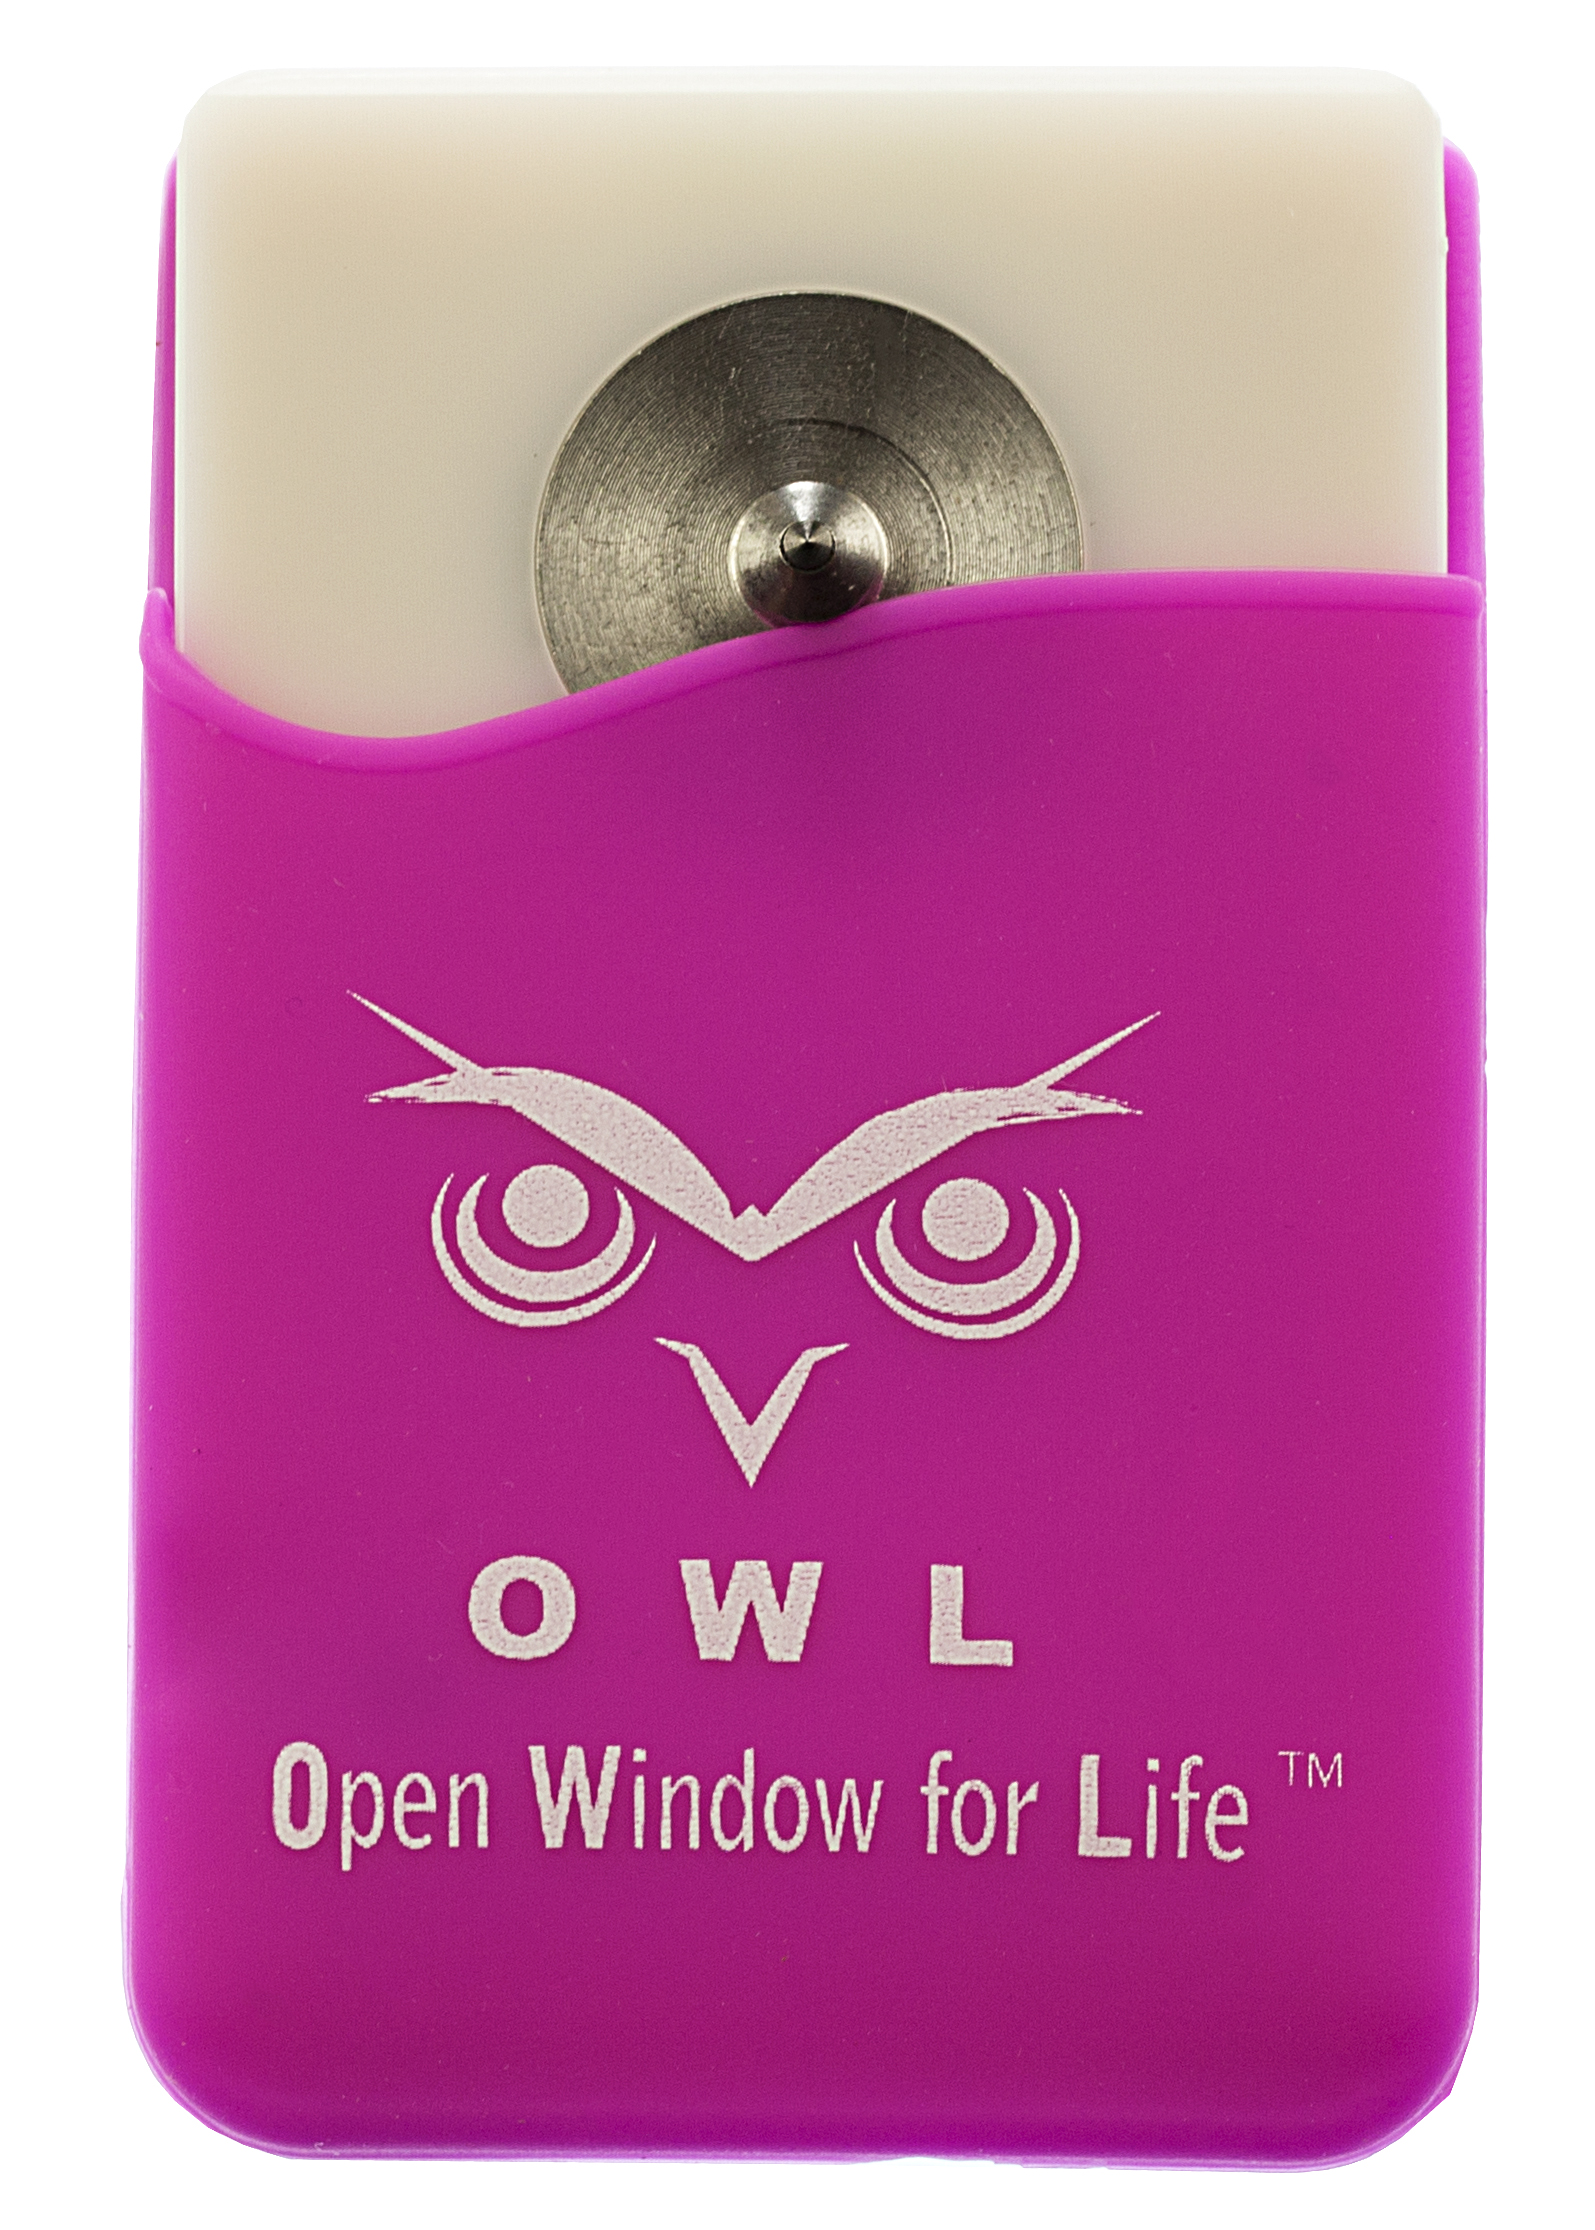 Osp1 Open Window For Life Auto Escape Tool - Pink